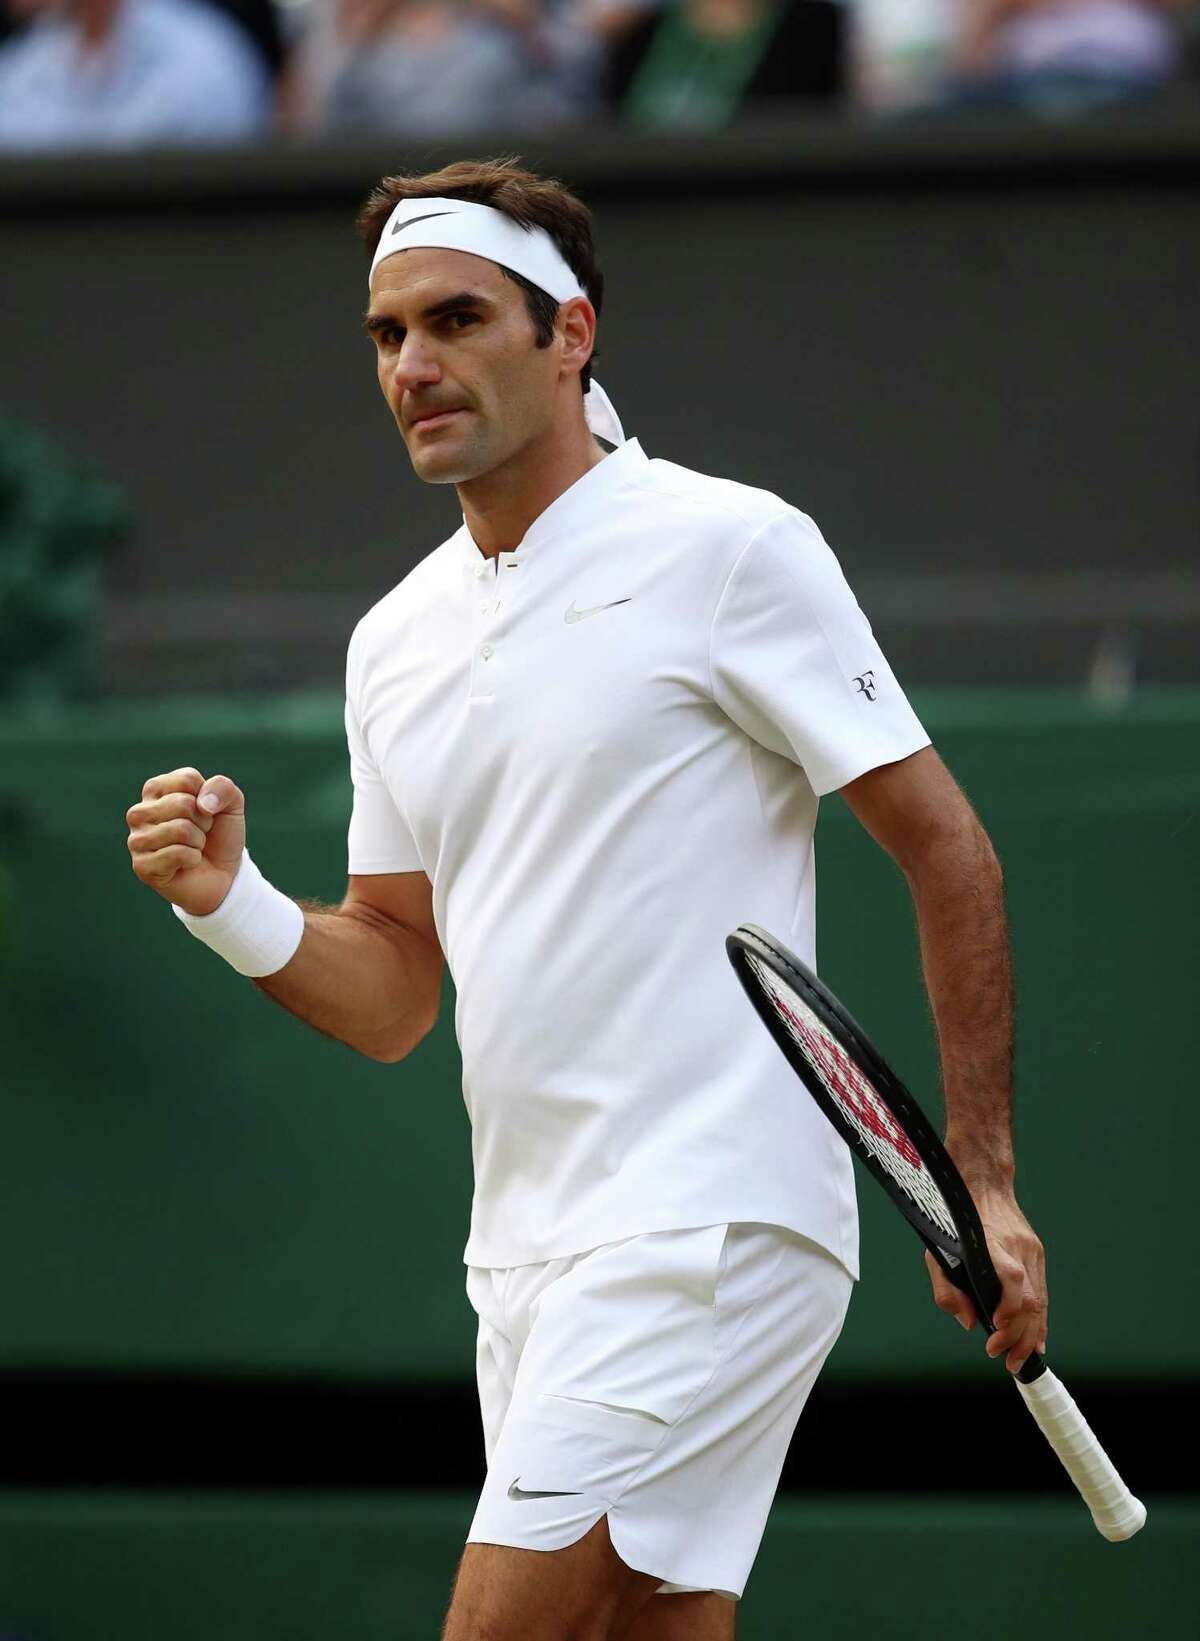 LONDON, ENGLAND - JULY 14: Roger Federer of Switzerland celebrates during the Gentlemen's Singles semi final match against Tomas Berdych of The Czech Republic on day eleven of the Wimbledon Lawn Tennis Championships at the All England Lawn Tennis and Croquet Club at Wimbledon at Wimbledon on July 14, 2017 in London, England. (Photo by Julian Finney/Getty Images)